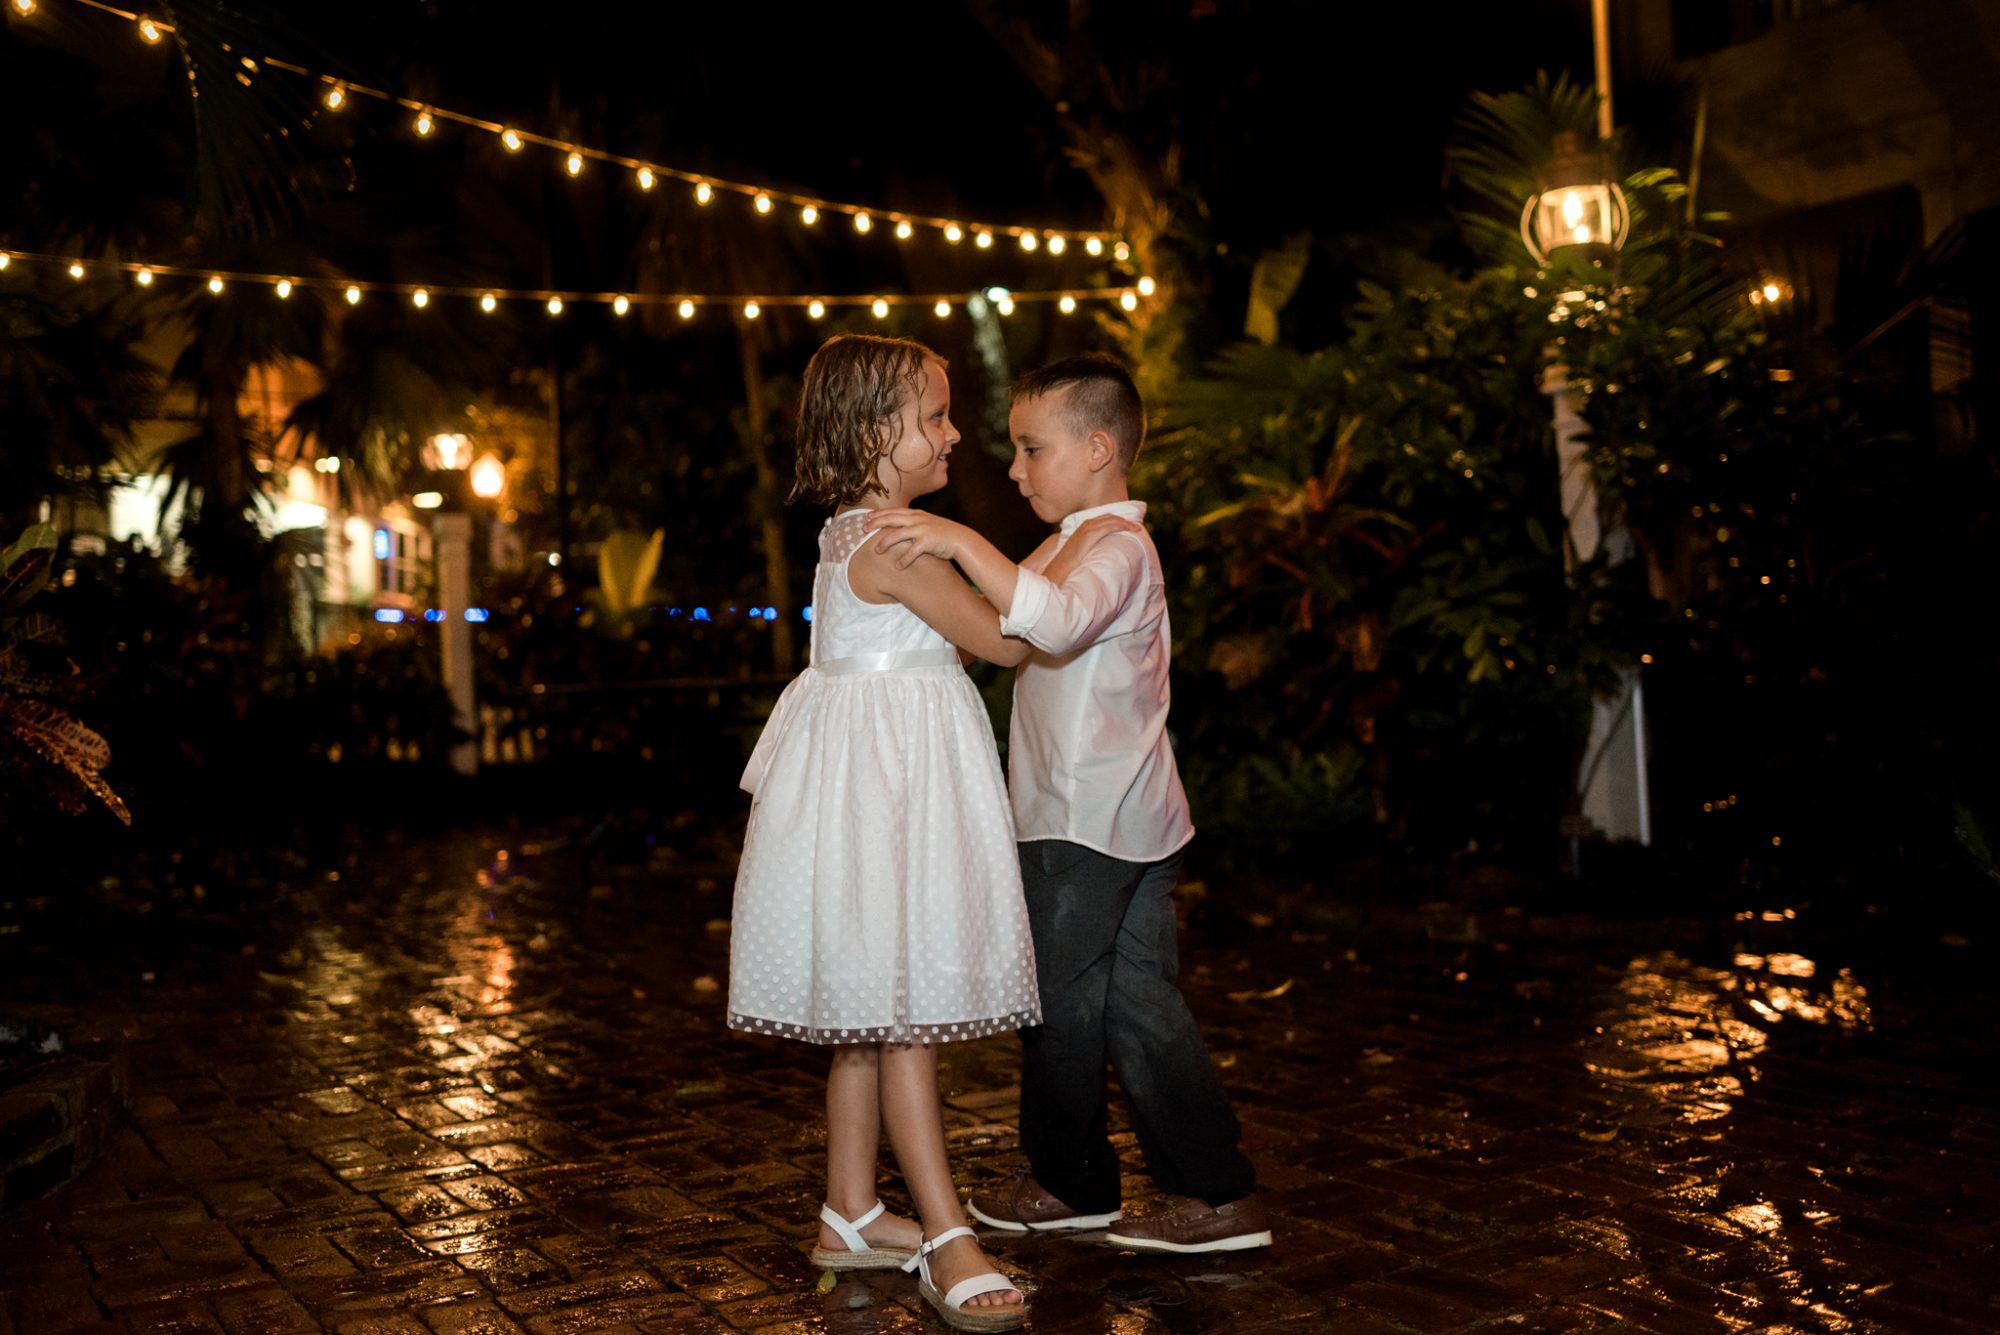 A boy and a girl dancing at night, Key West Audubon House and Gardens wedding.